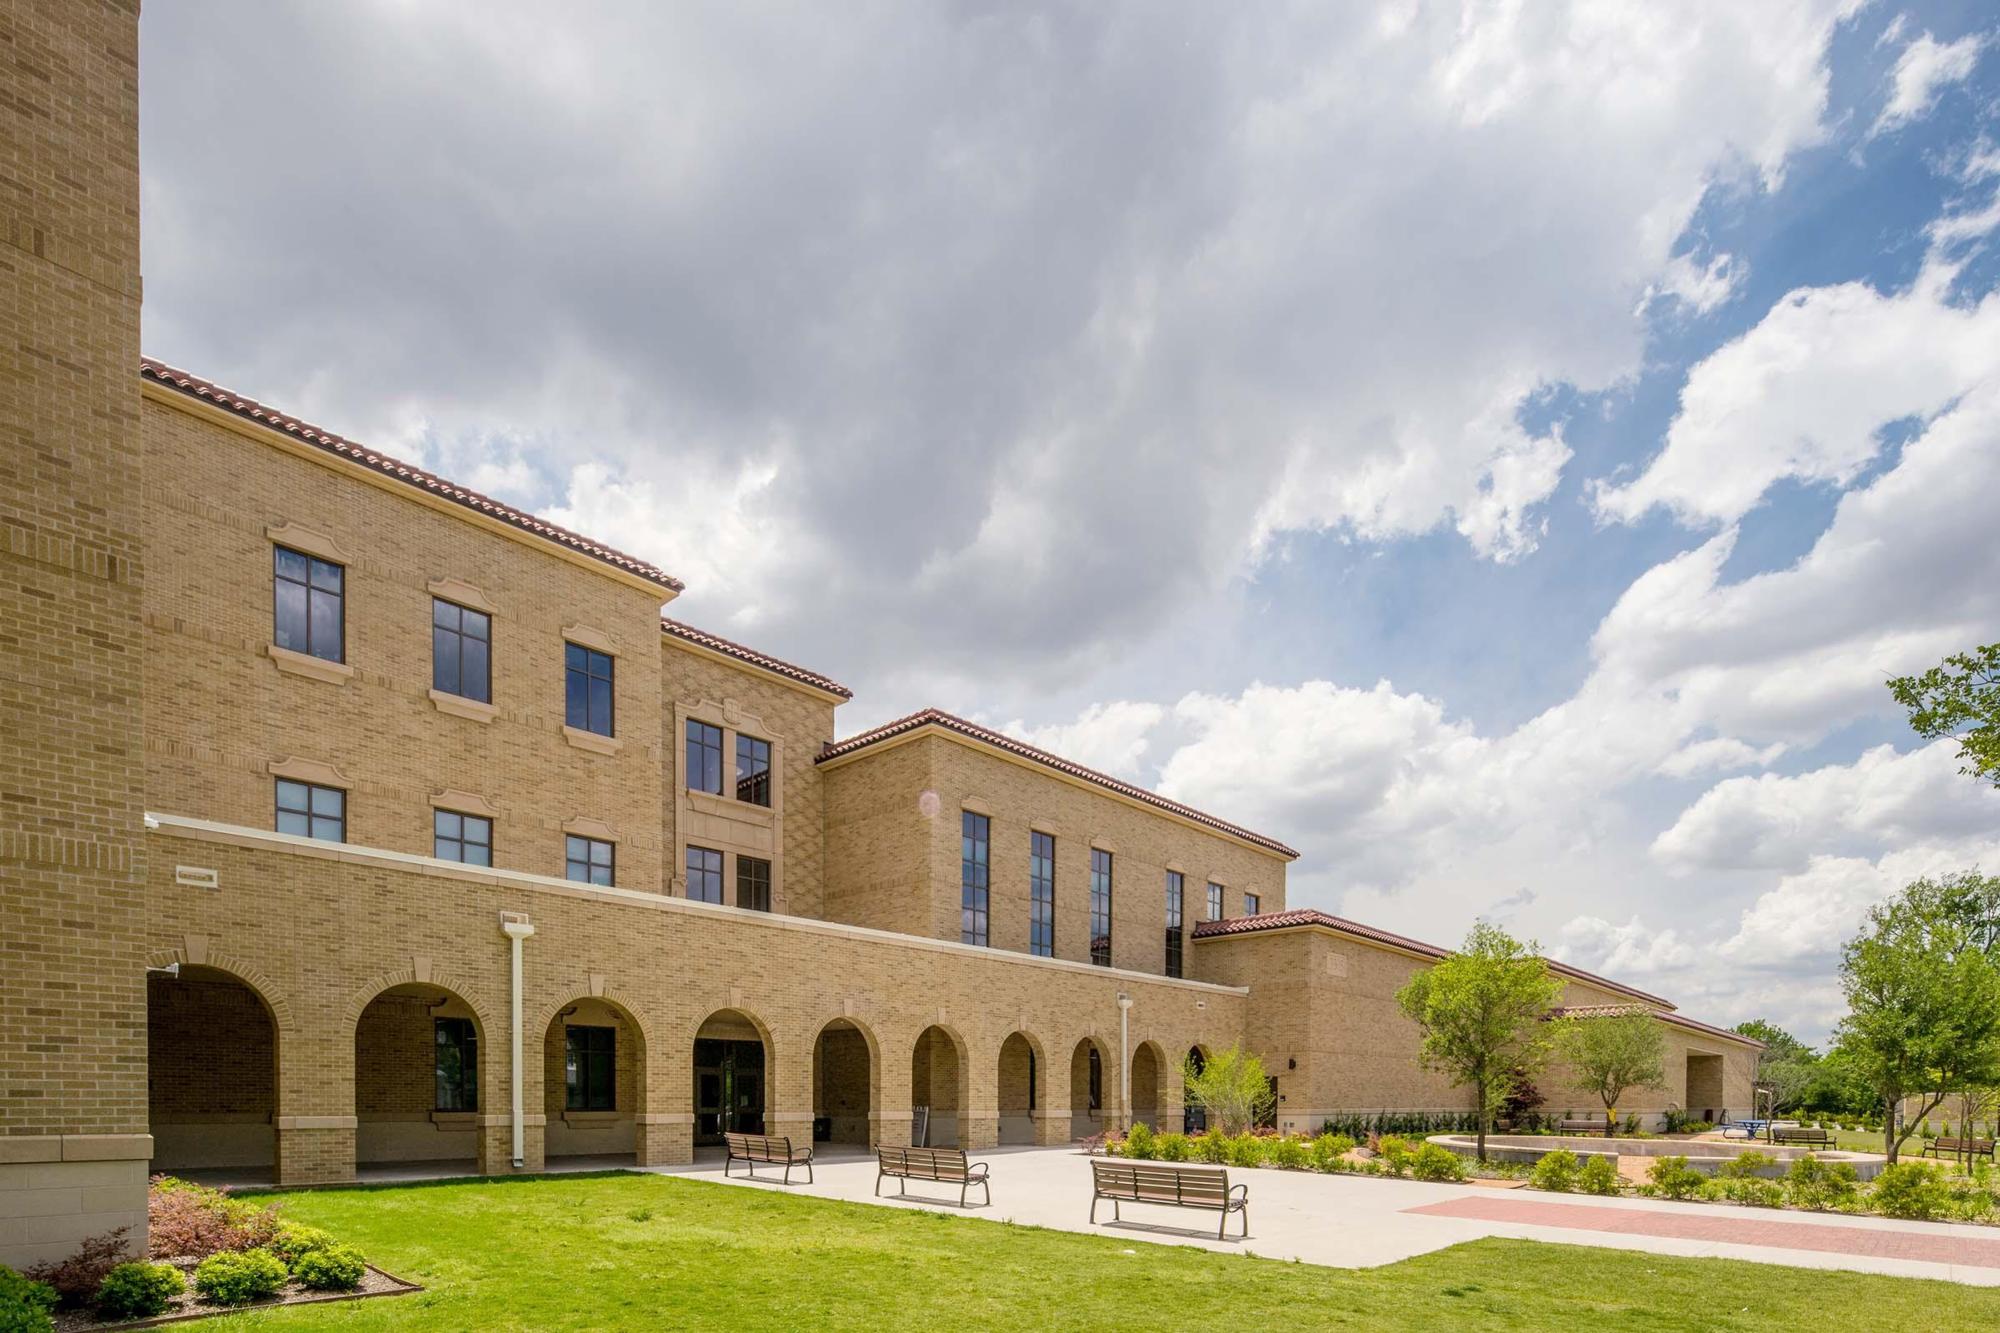 Image of the whole of University Park Elementary School, showcasing brown brick and green lawns under a cloudy yet blue sky